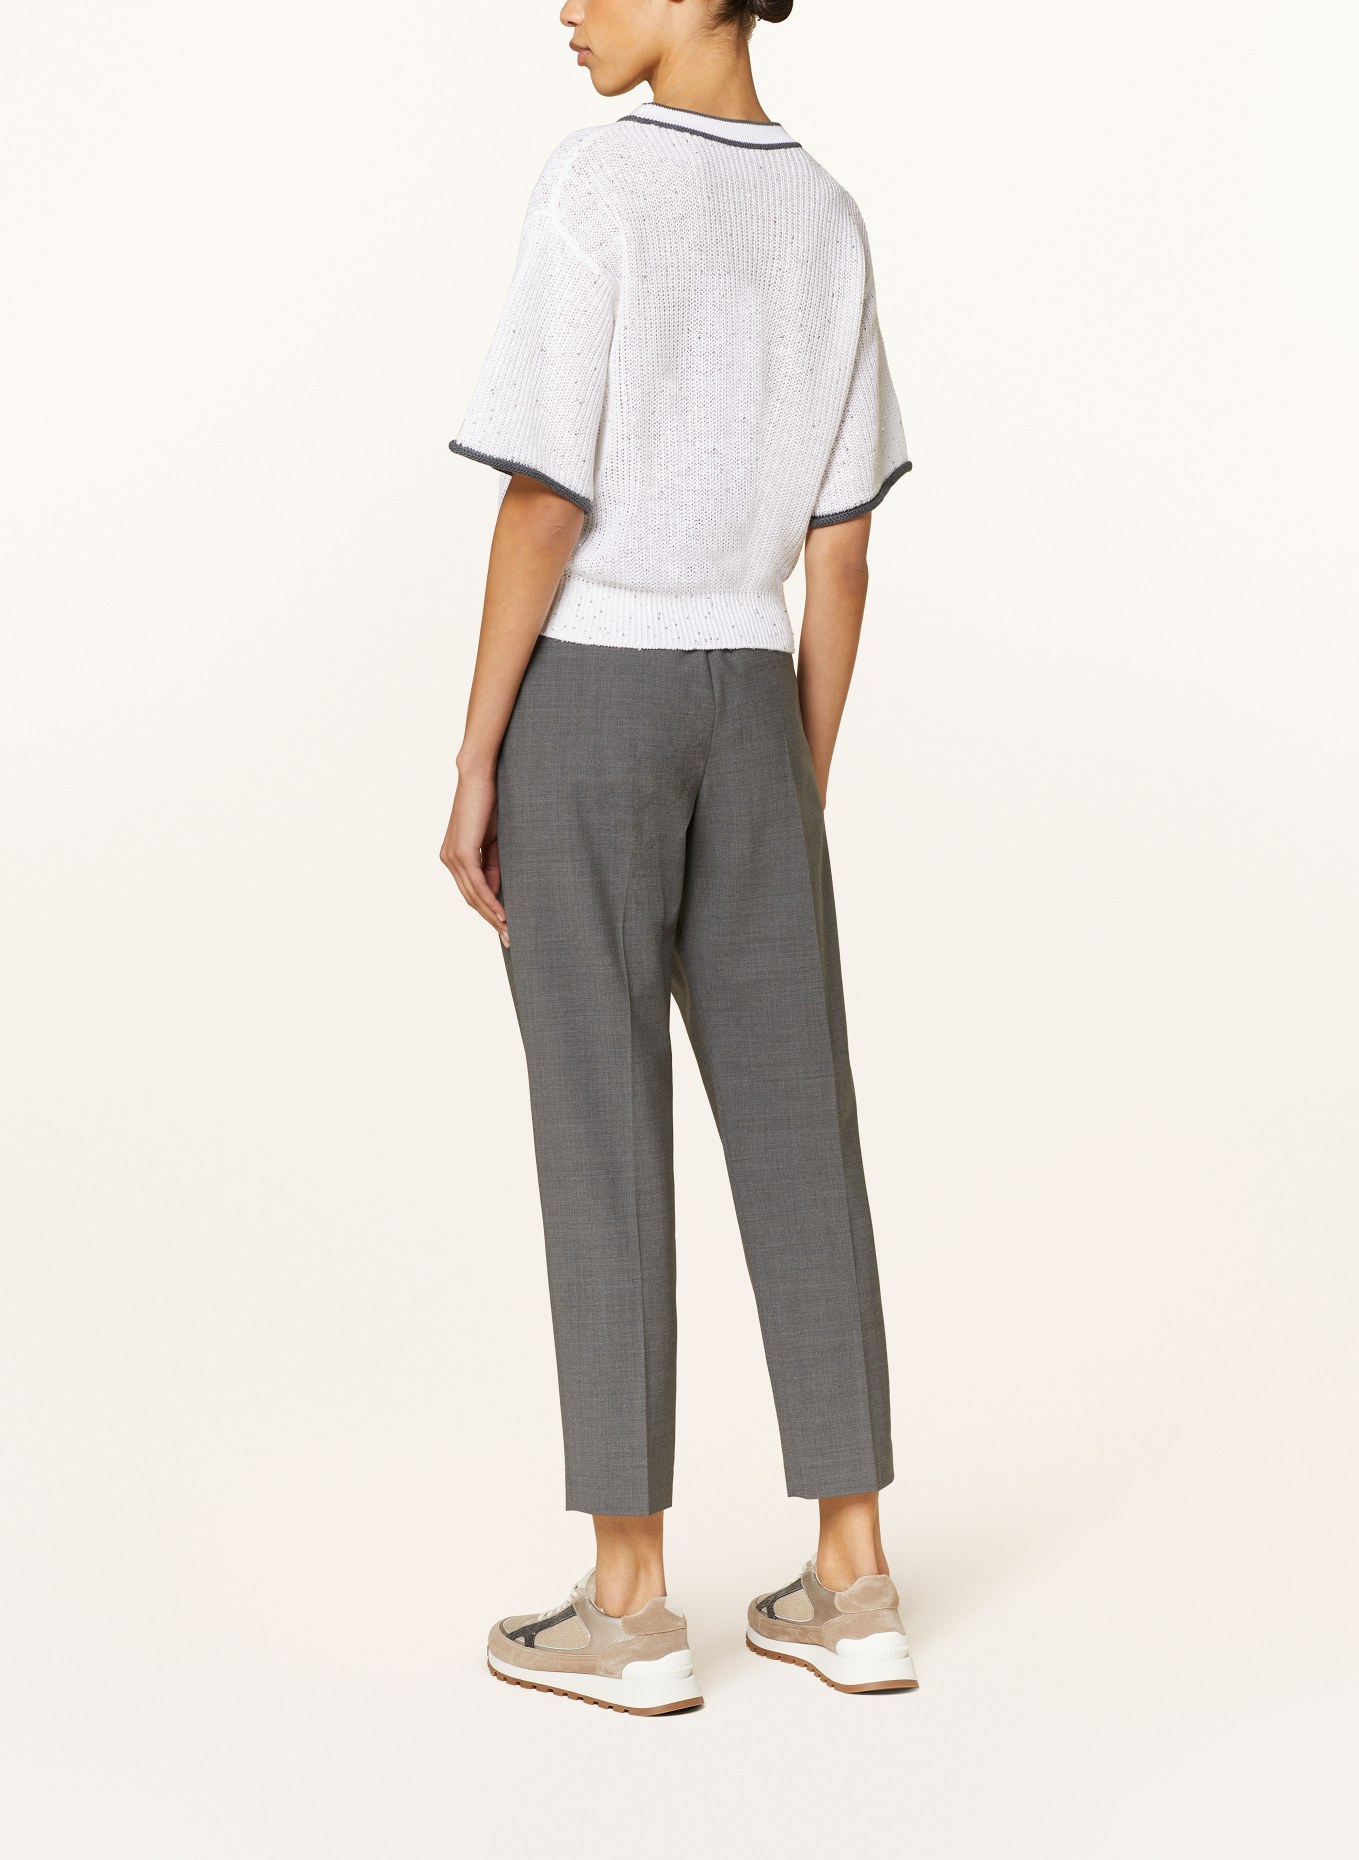 BRUNELLO CUCINELLI Knit shirt made of linen with sequins, Color: WHITE/ DARK GRAY (Image 3)